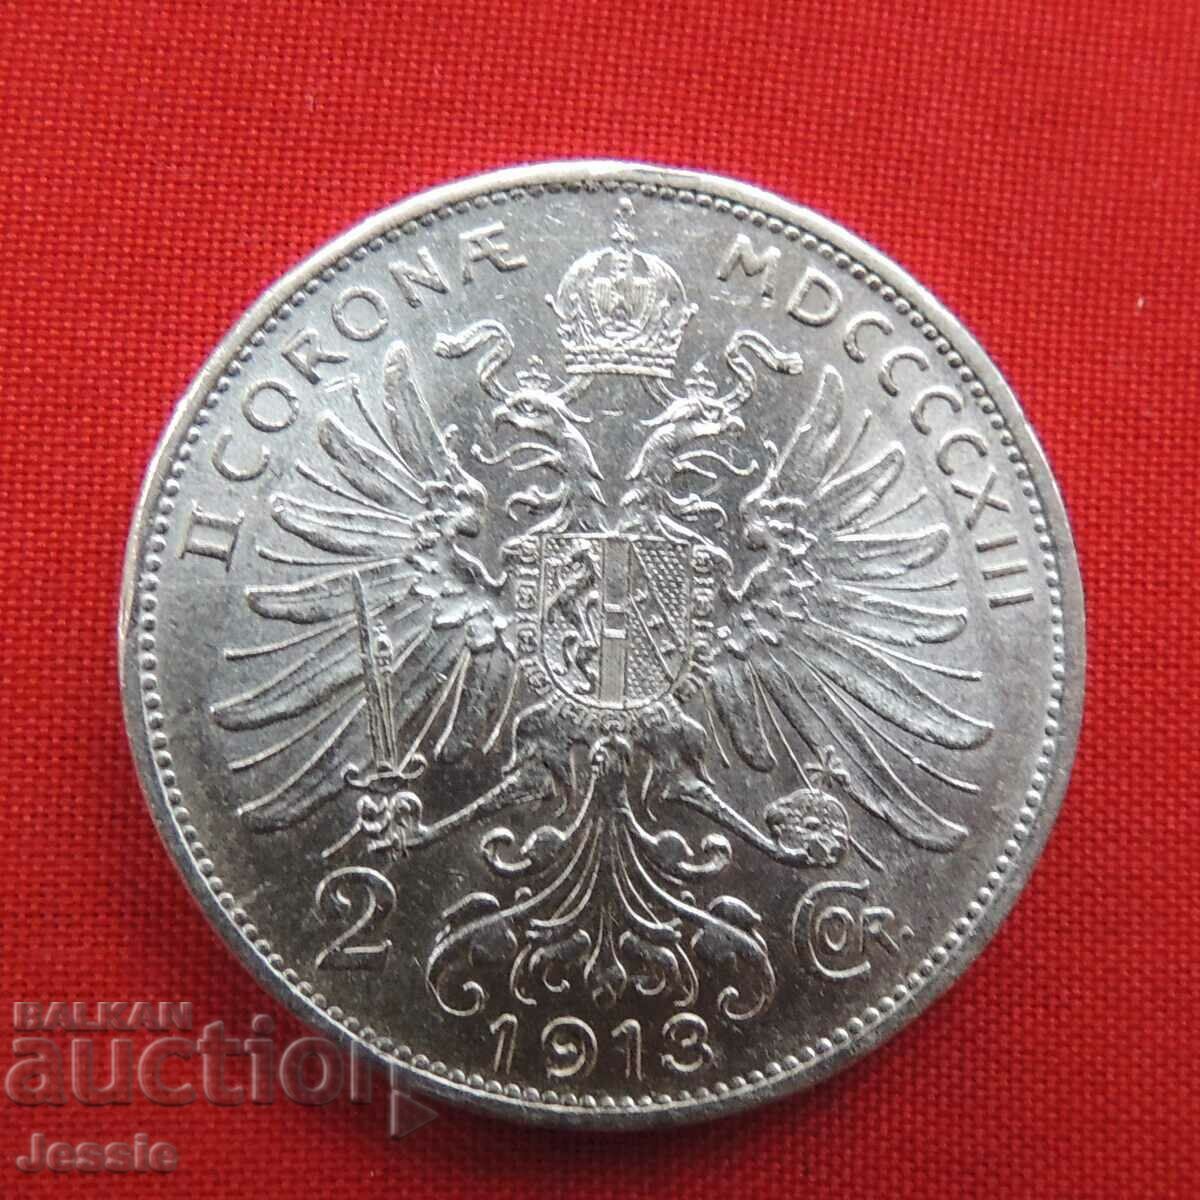 2 crowns 1913 Austria-Hungary silver